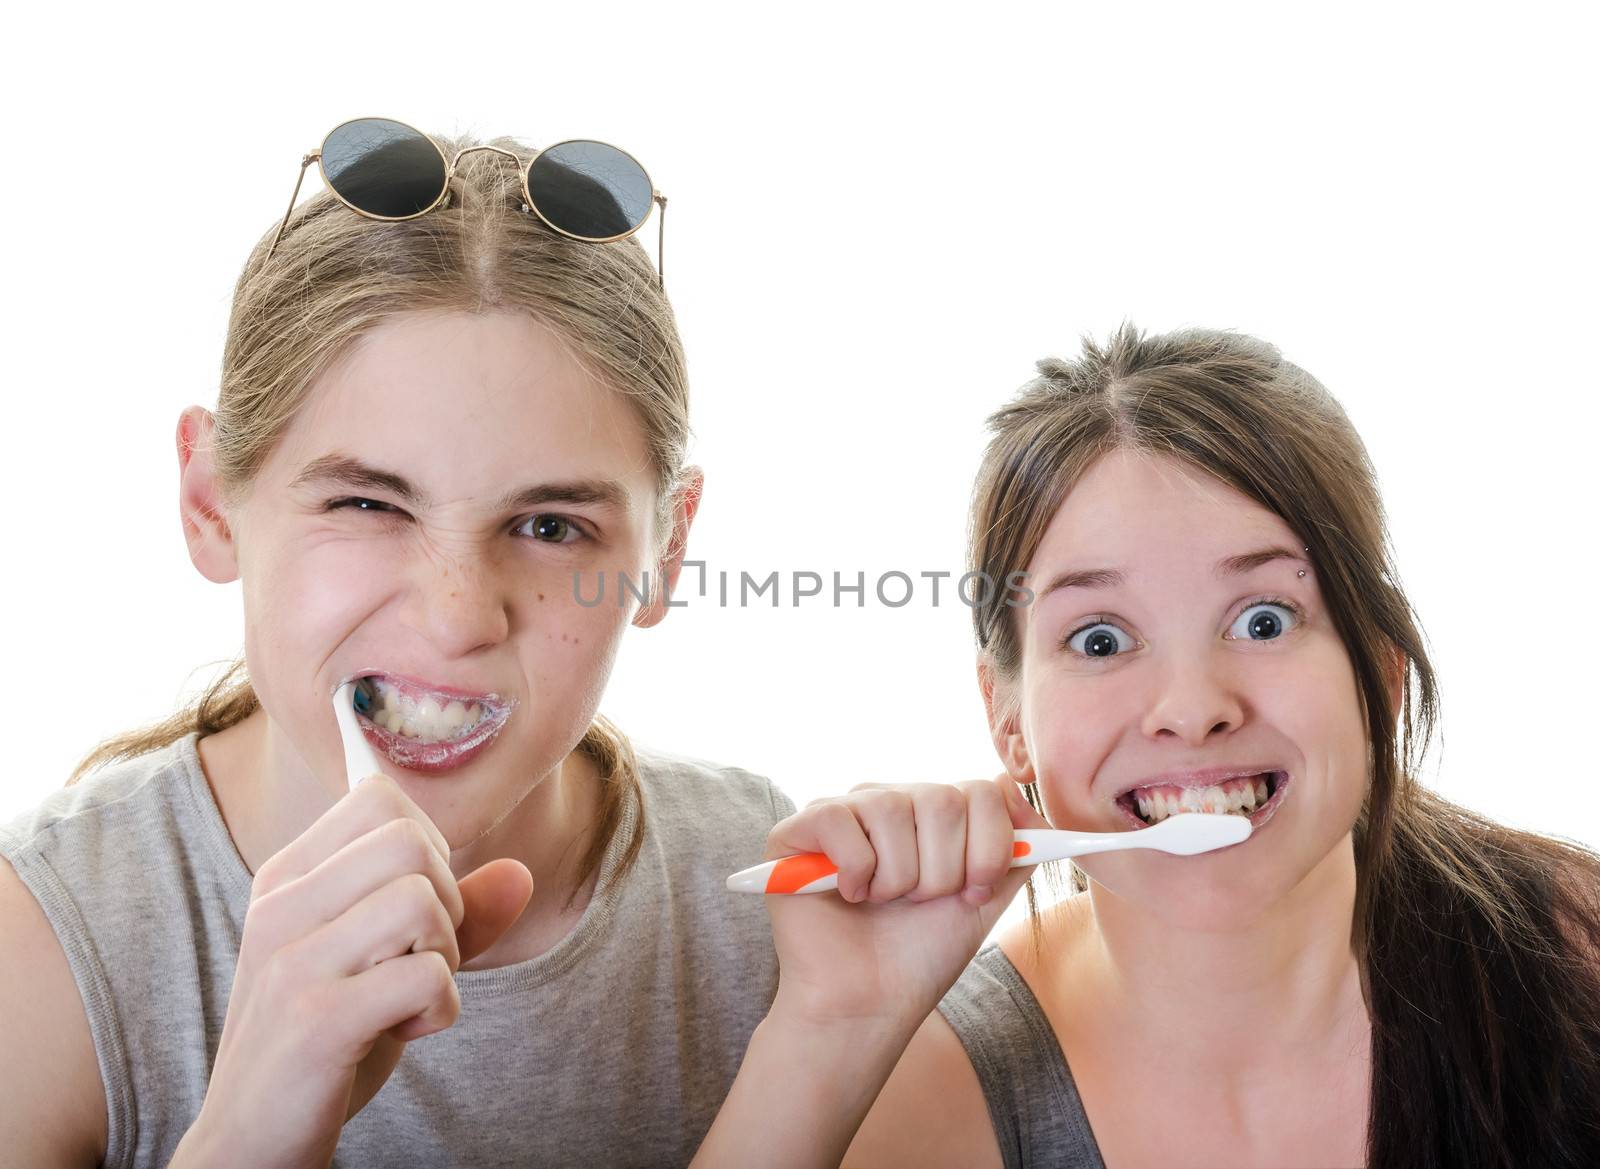 Young Couple Grimacing while Brushing their Teeth in front of camera, Horizontal Shot over White